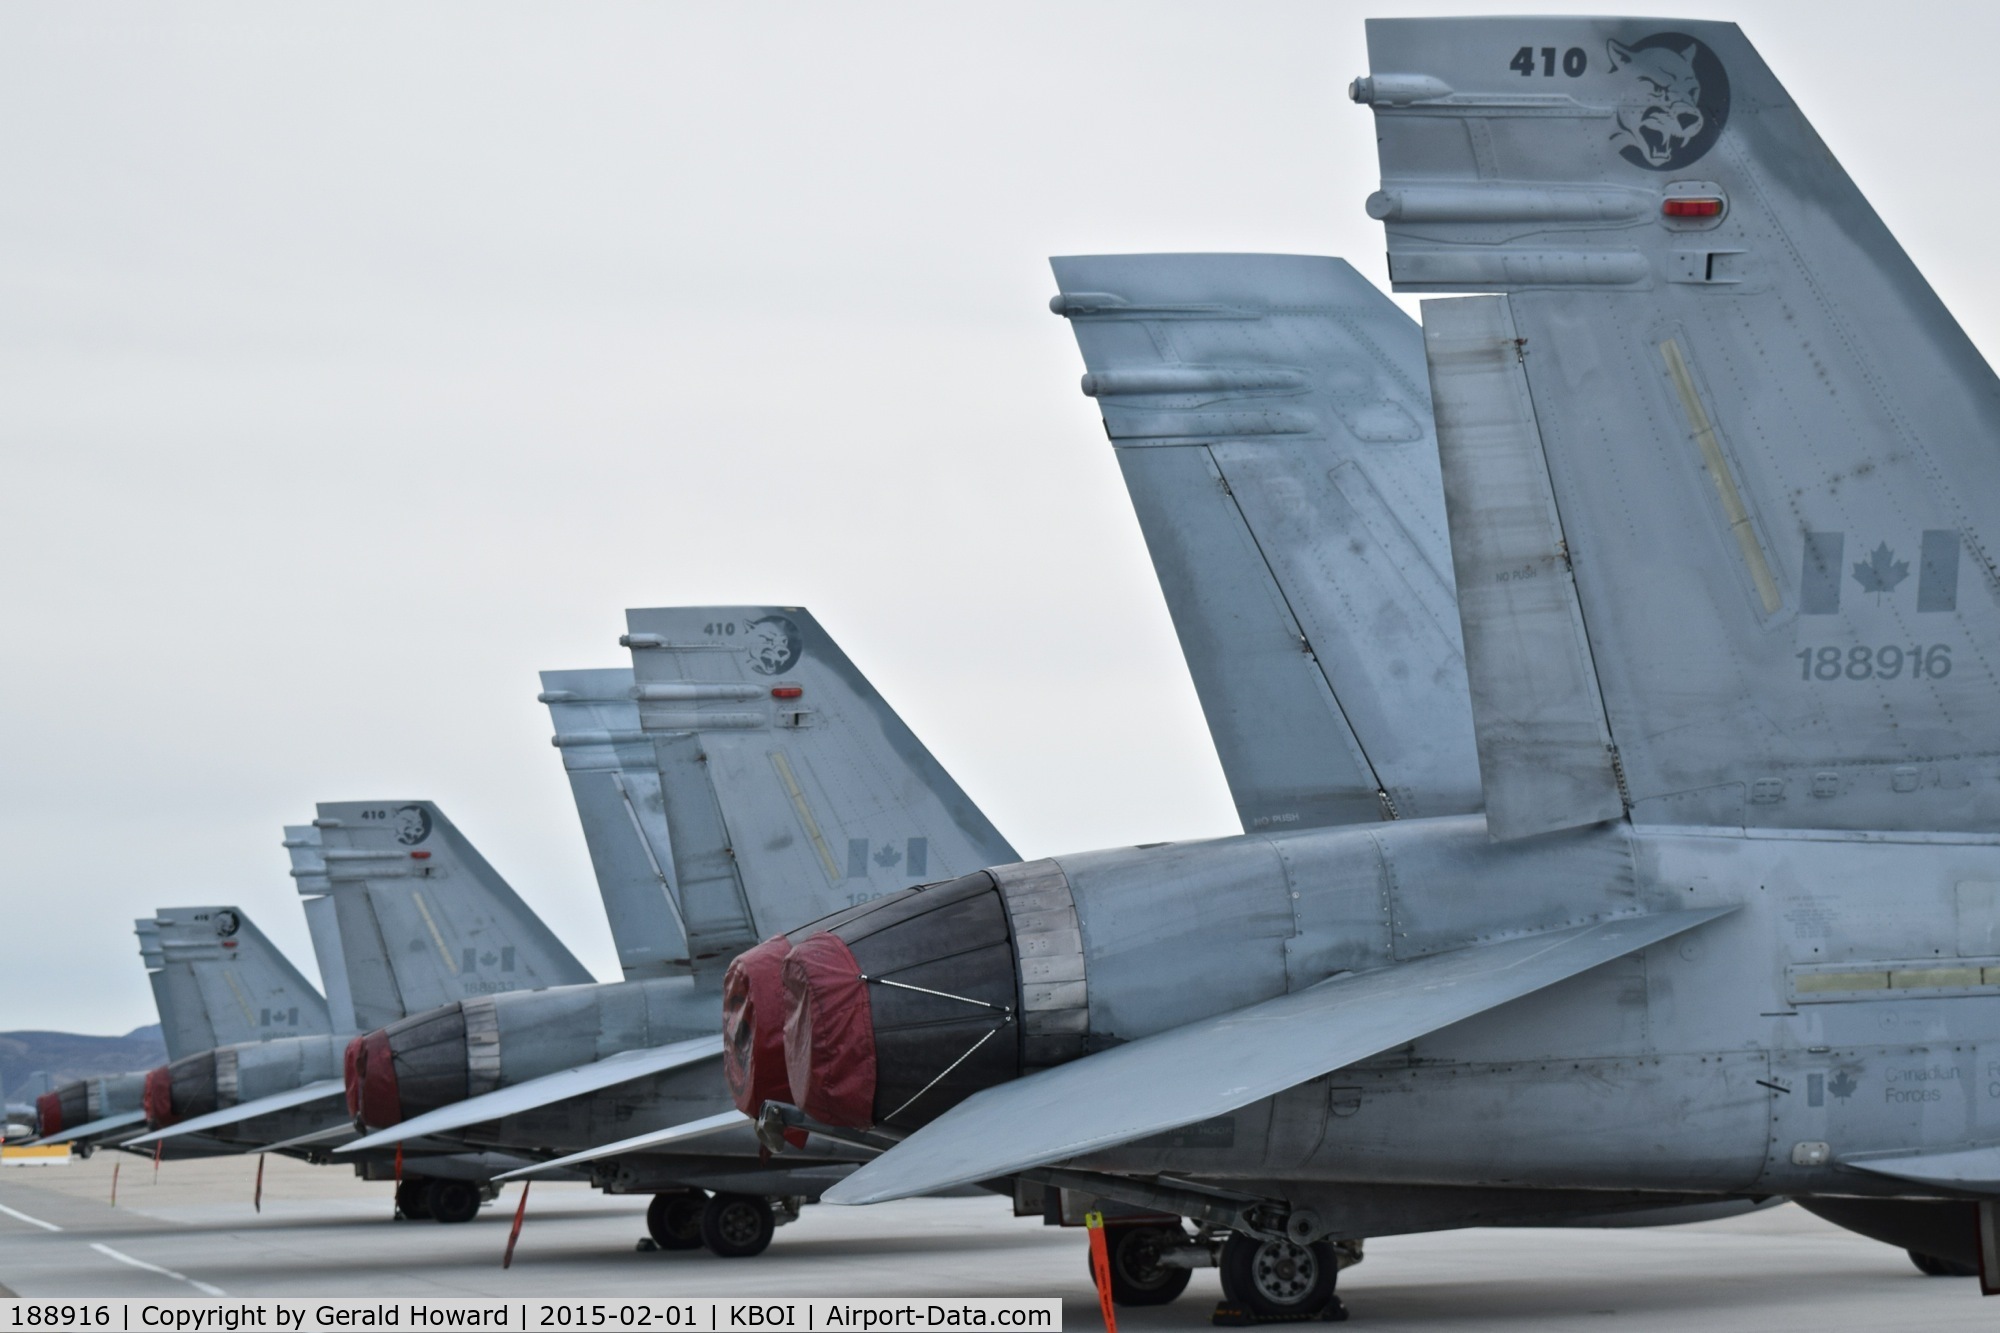 188916, 1985 McDonnell Douglas CF-188B Hornet C/N 221/B045, Parked on south GA ramp with other 410 Sq. aircraft. 410 SQ., Cold Lake, Alberta, Canada.